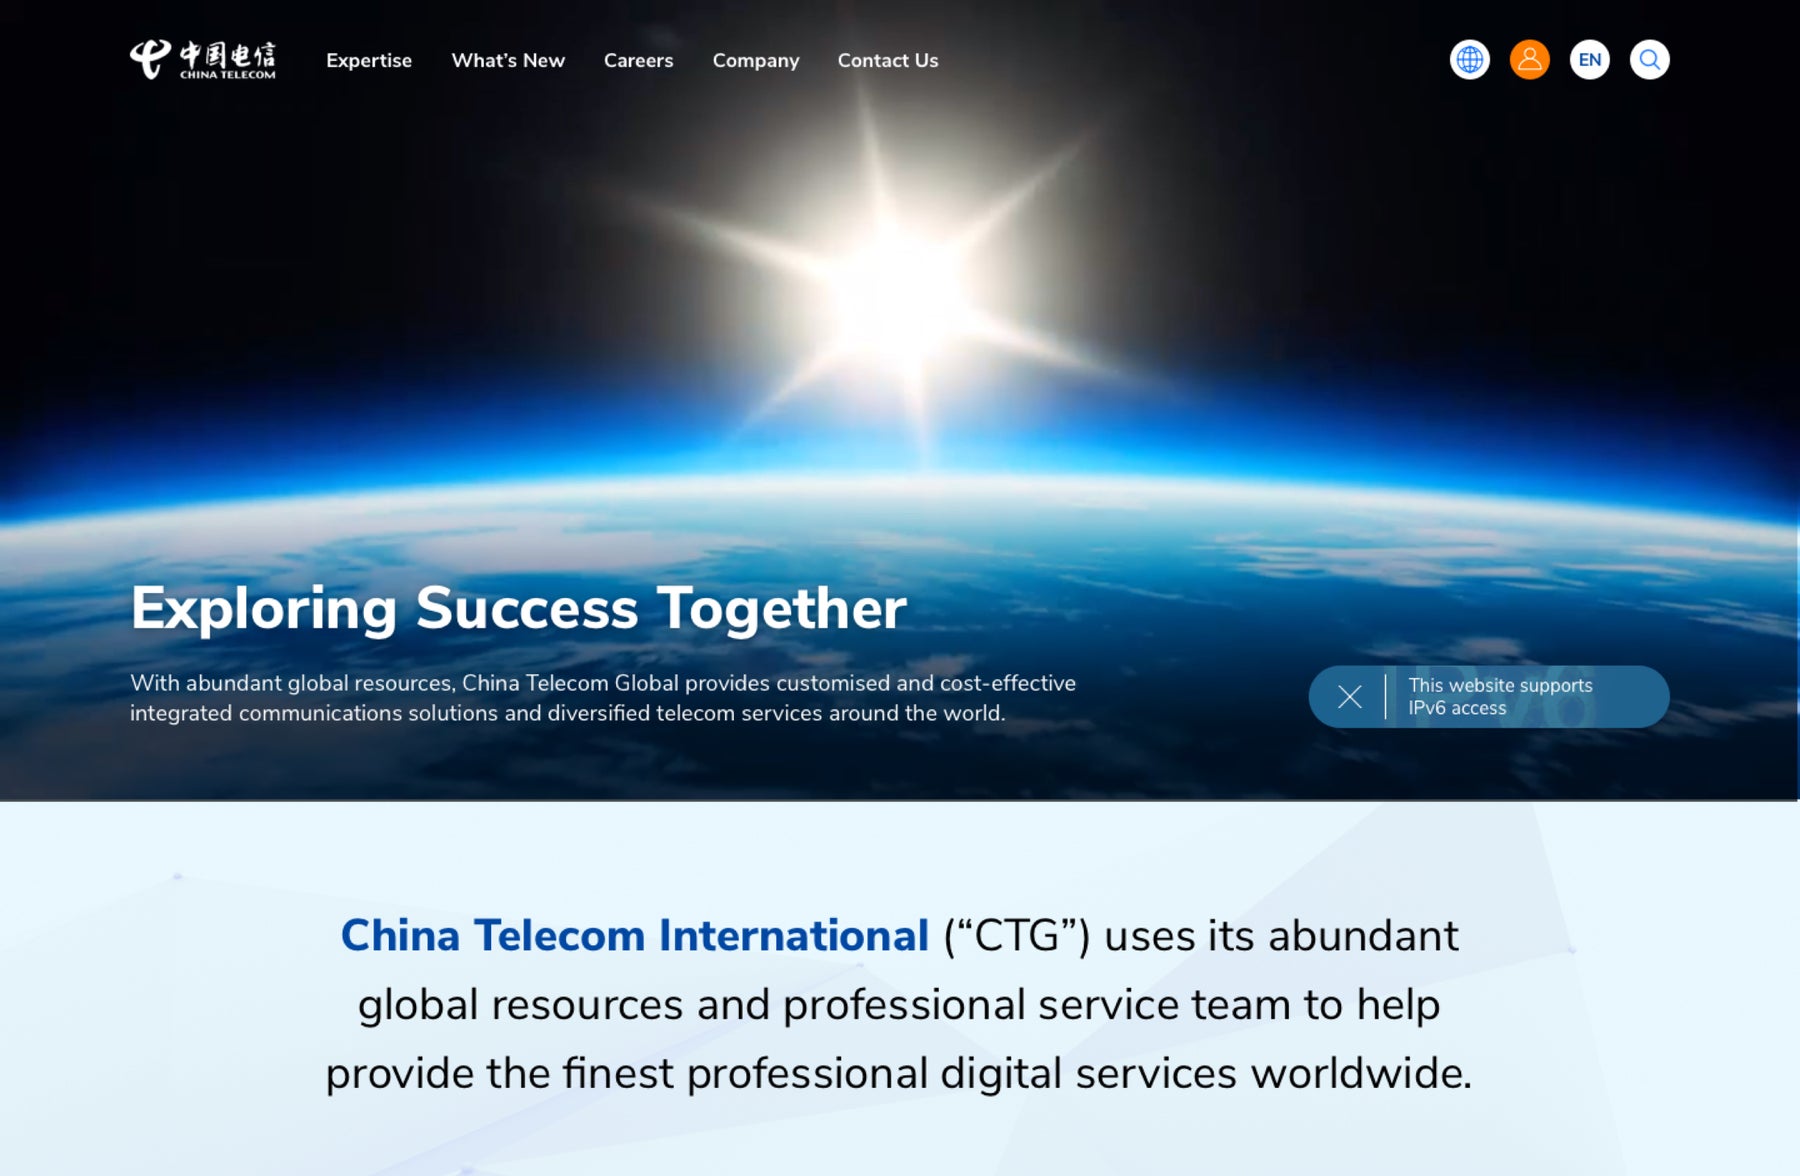 Bringing China's preeminent network to the world stage.